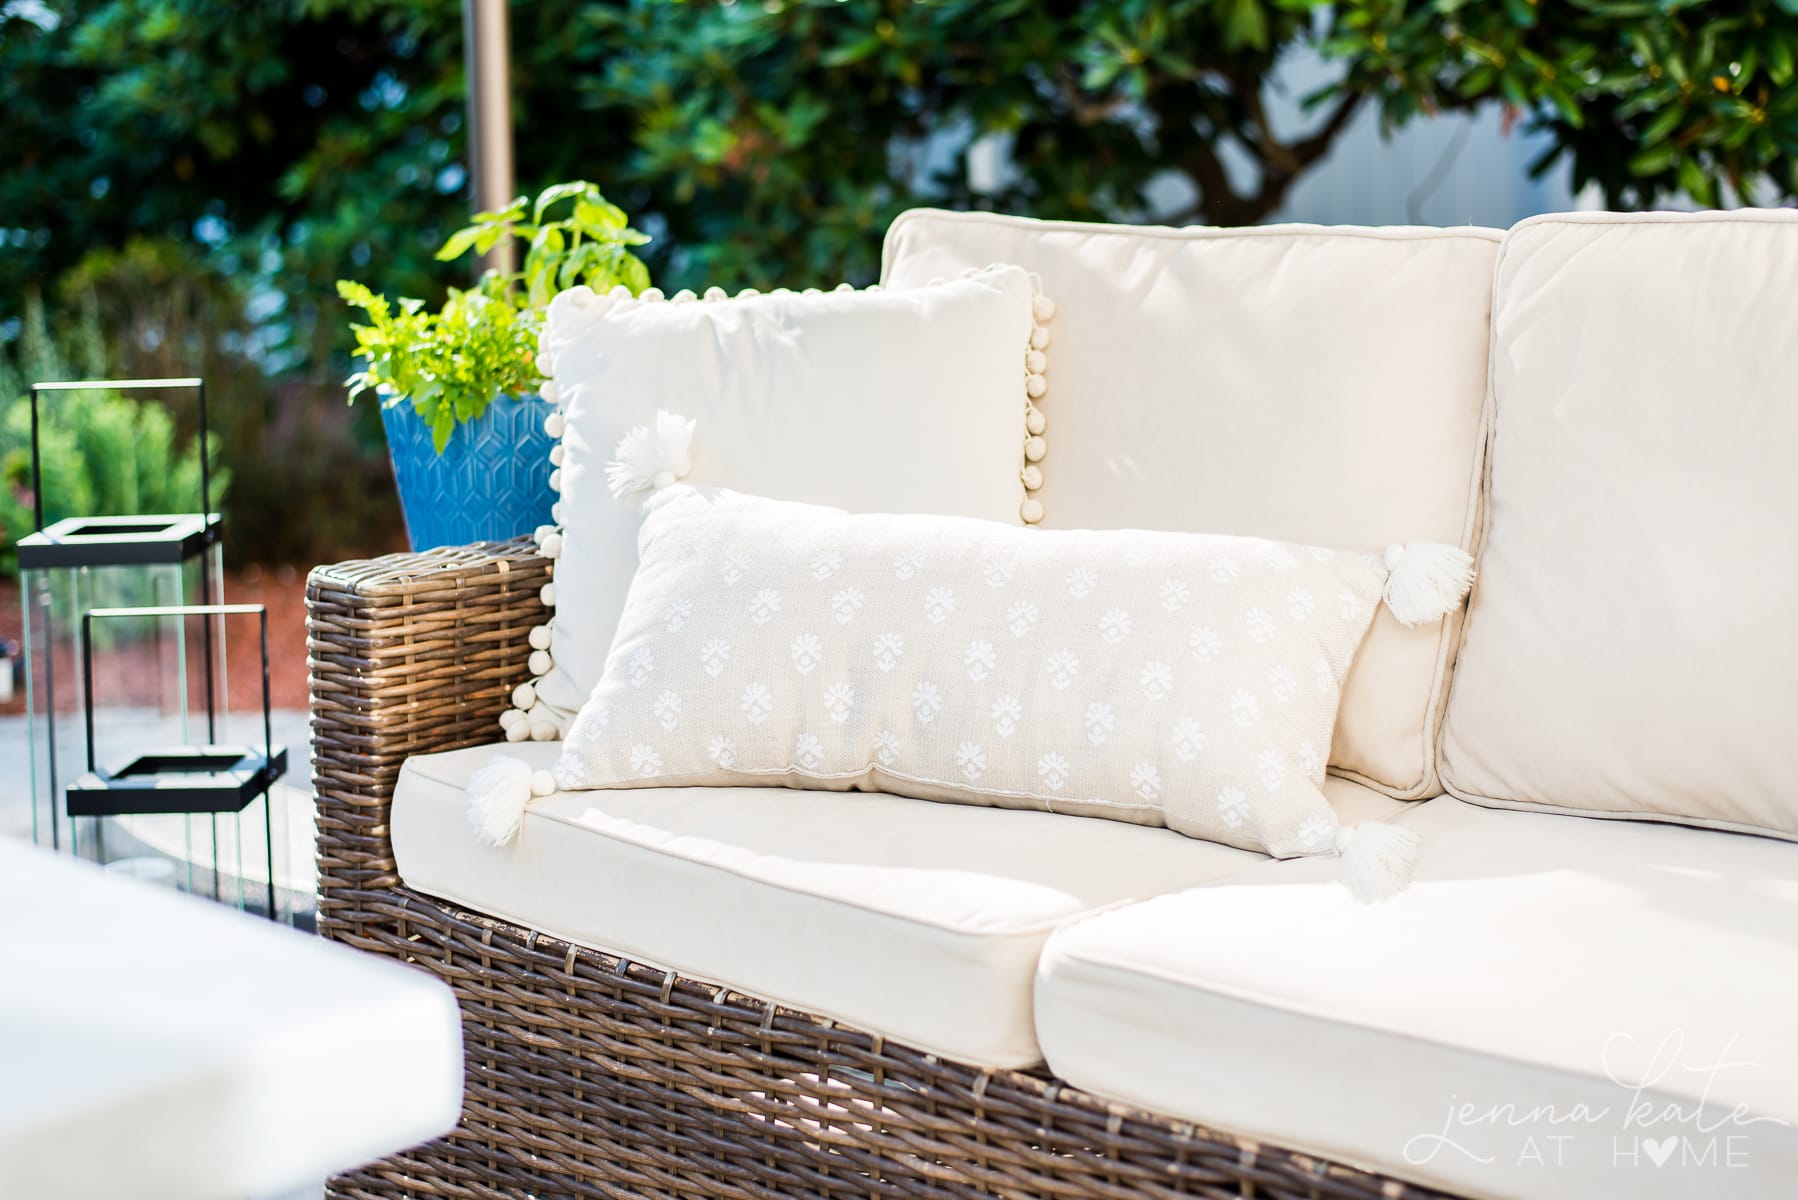 How To Clean Outdoor Cushions Jenna, How To Clean Outdoor Waterproof Cushions